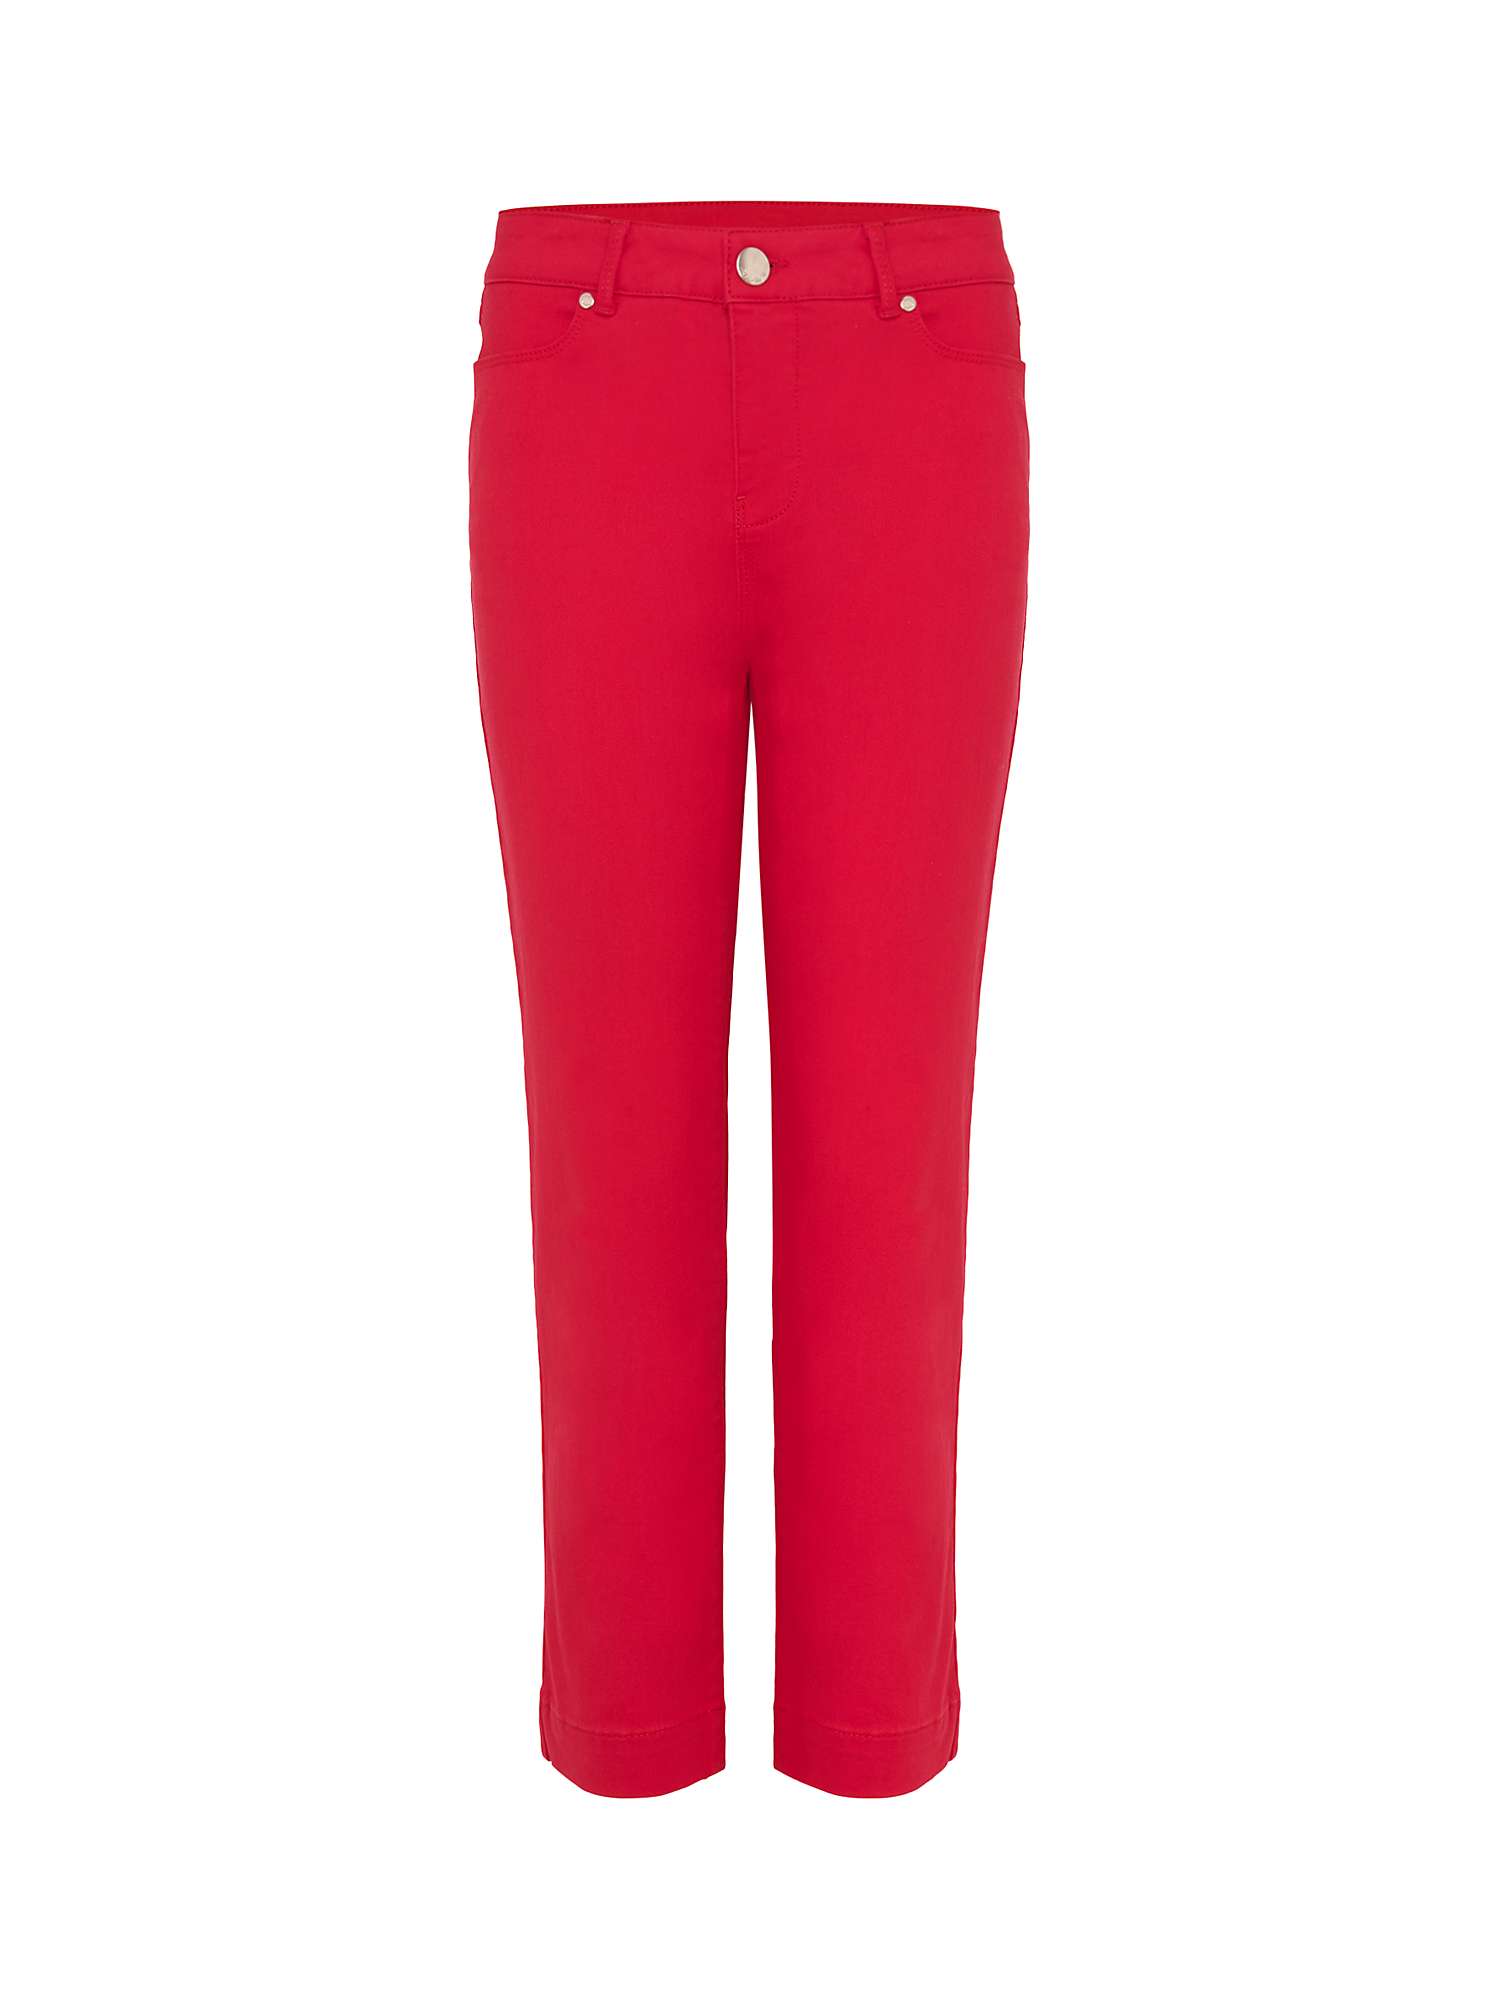 Buy Phase Eight Ramona Cropped Straight Leg Jeans Online at johnlewis.com